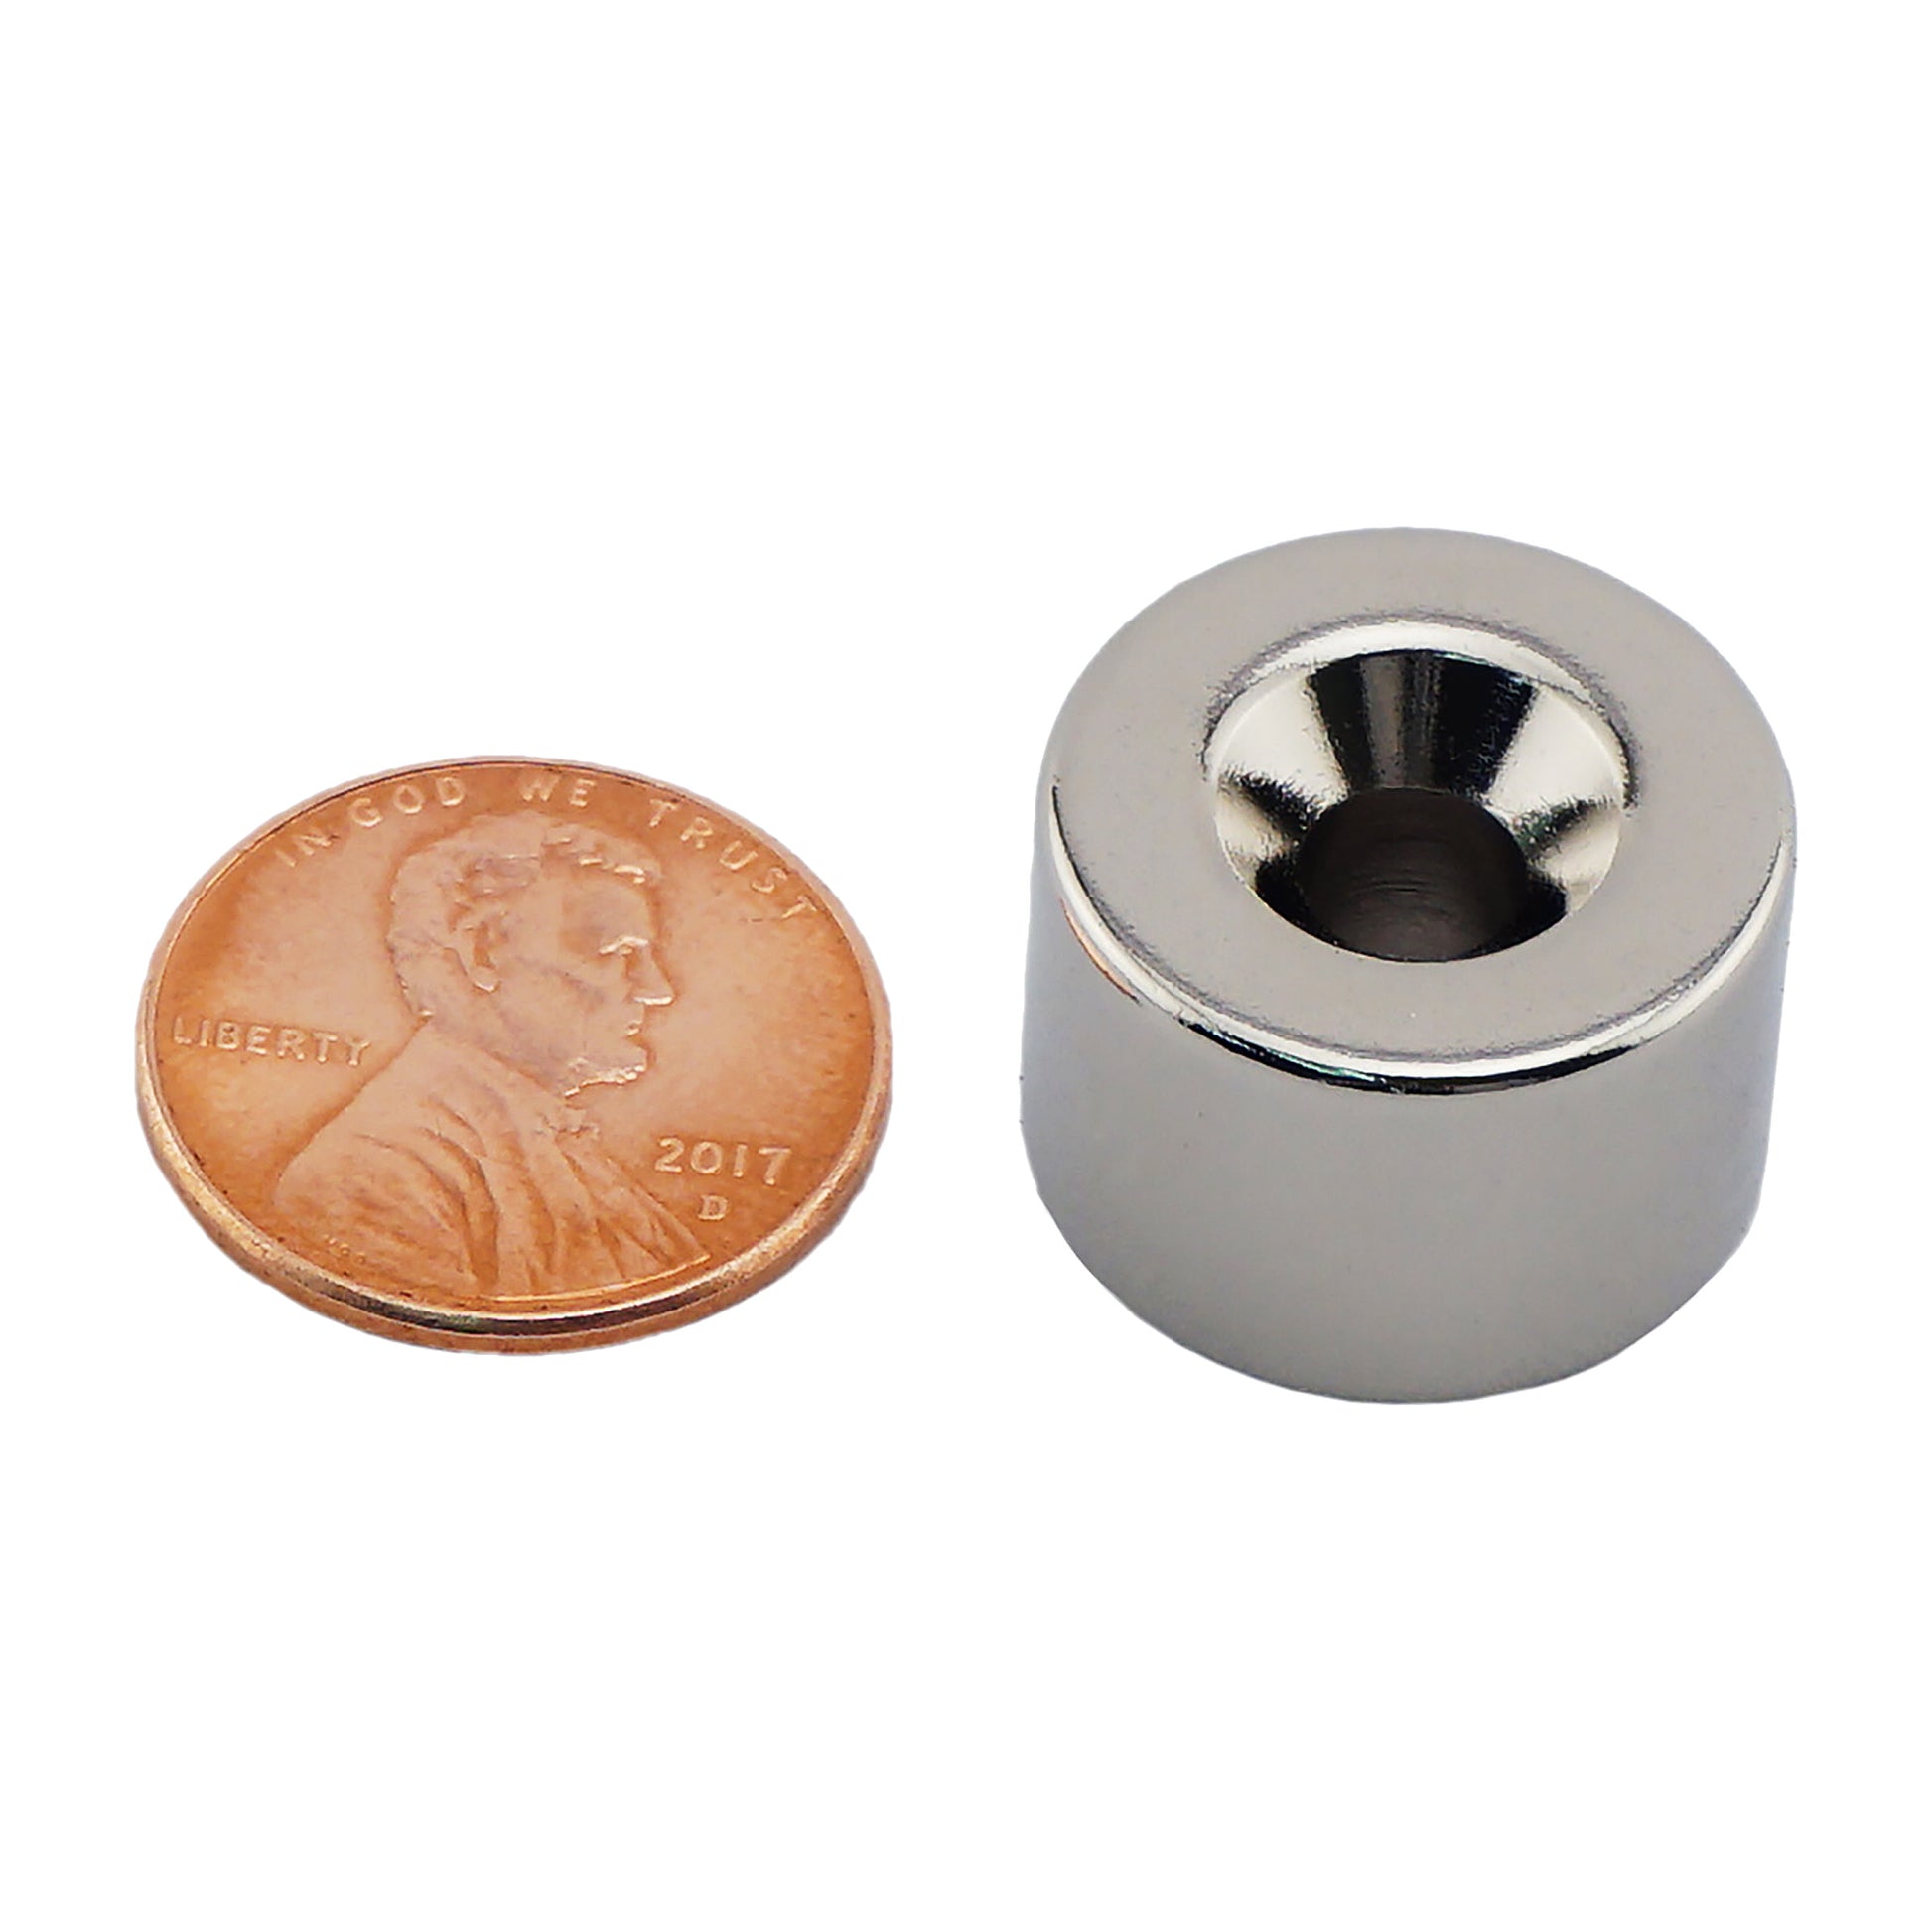 Load image into Gallery viewer, NR007520NCTS Neodymium Countersunk Ring Magnet - Compared to Penny for Size Reference